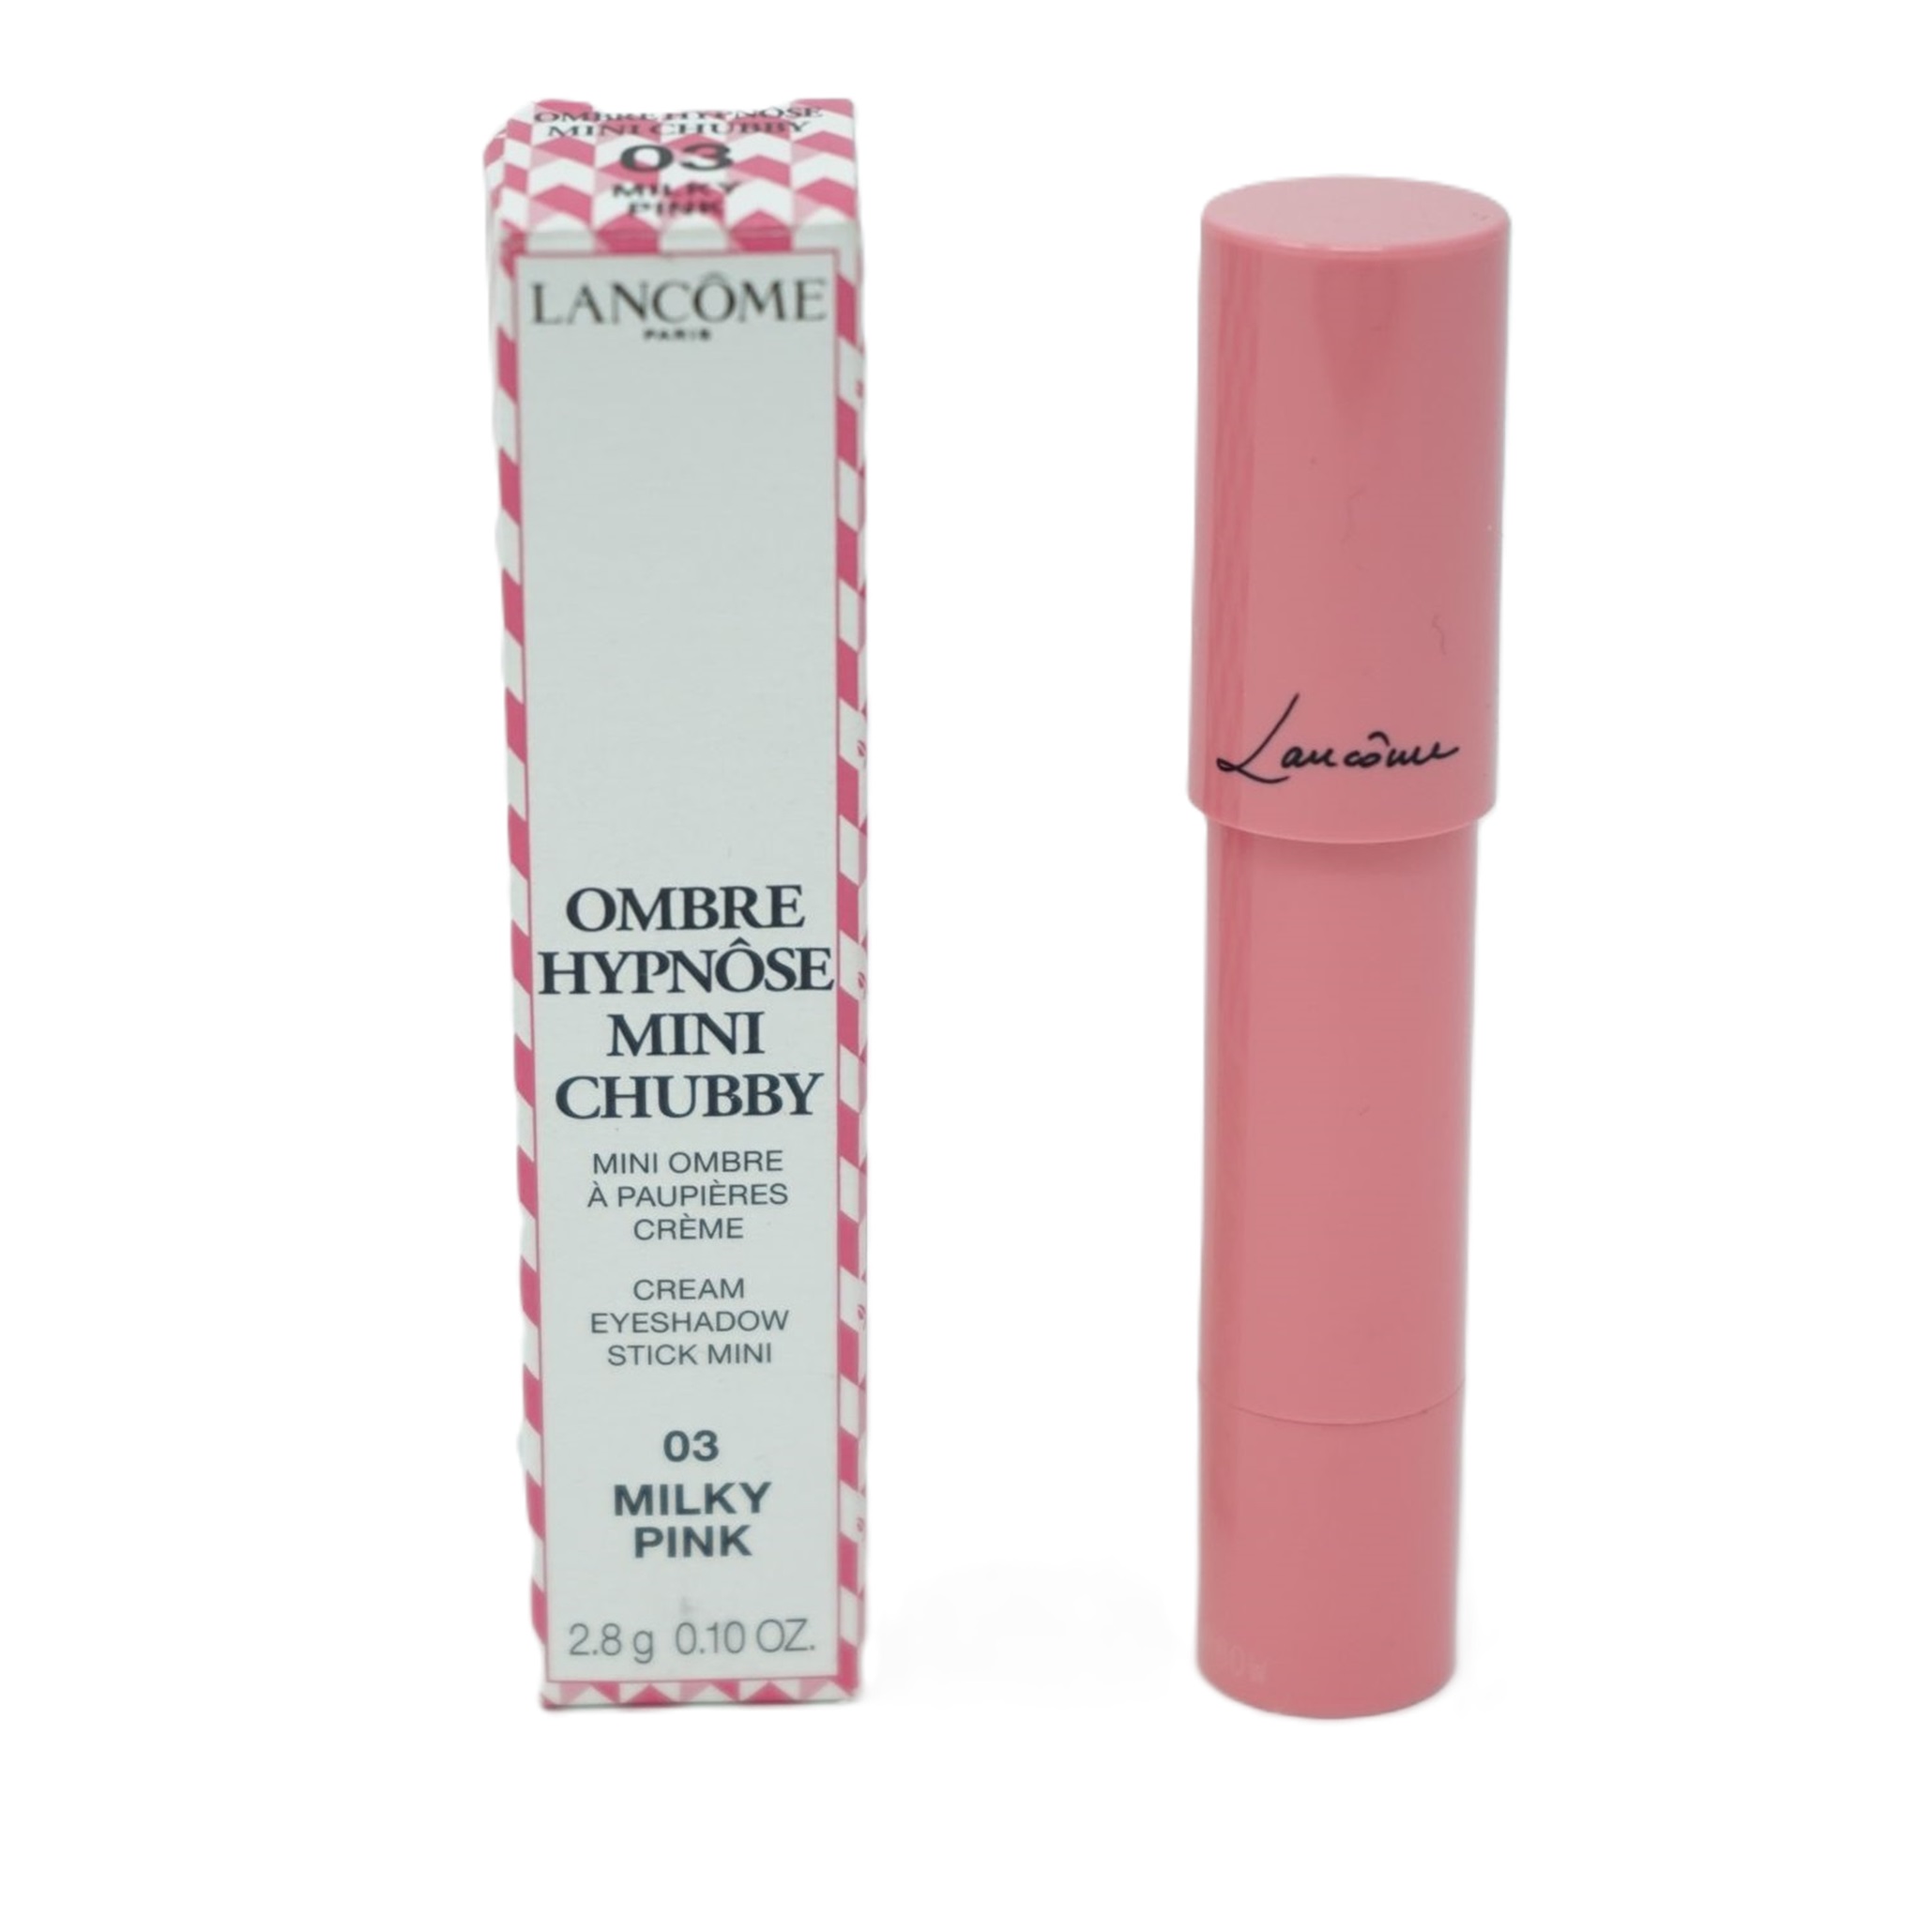 lancome Ombre Hypnose Eyeshadow Stick 03 Milky Pink